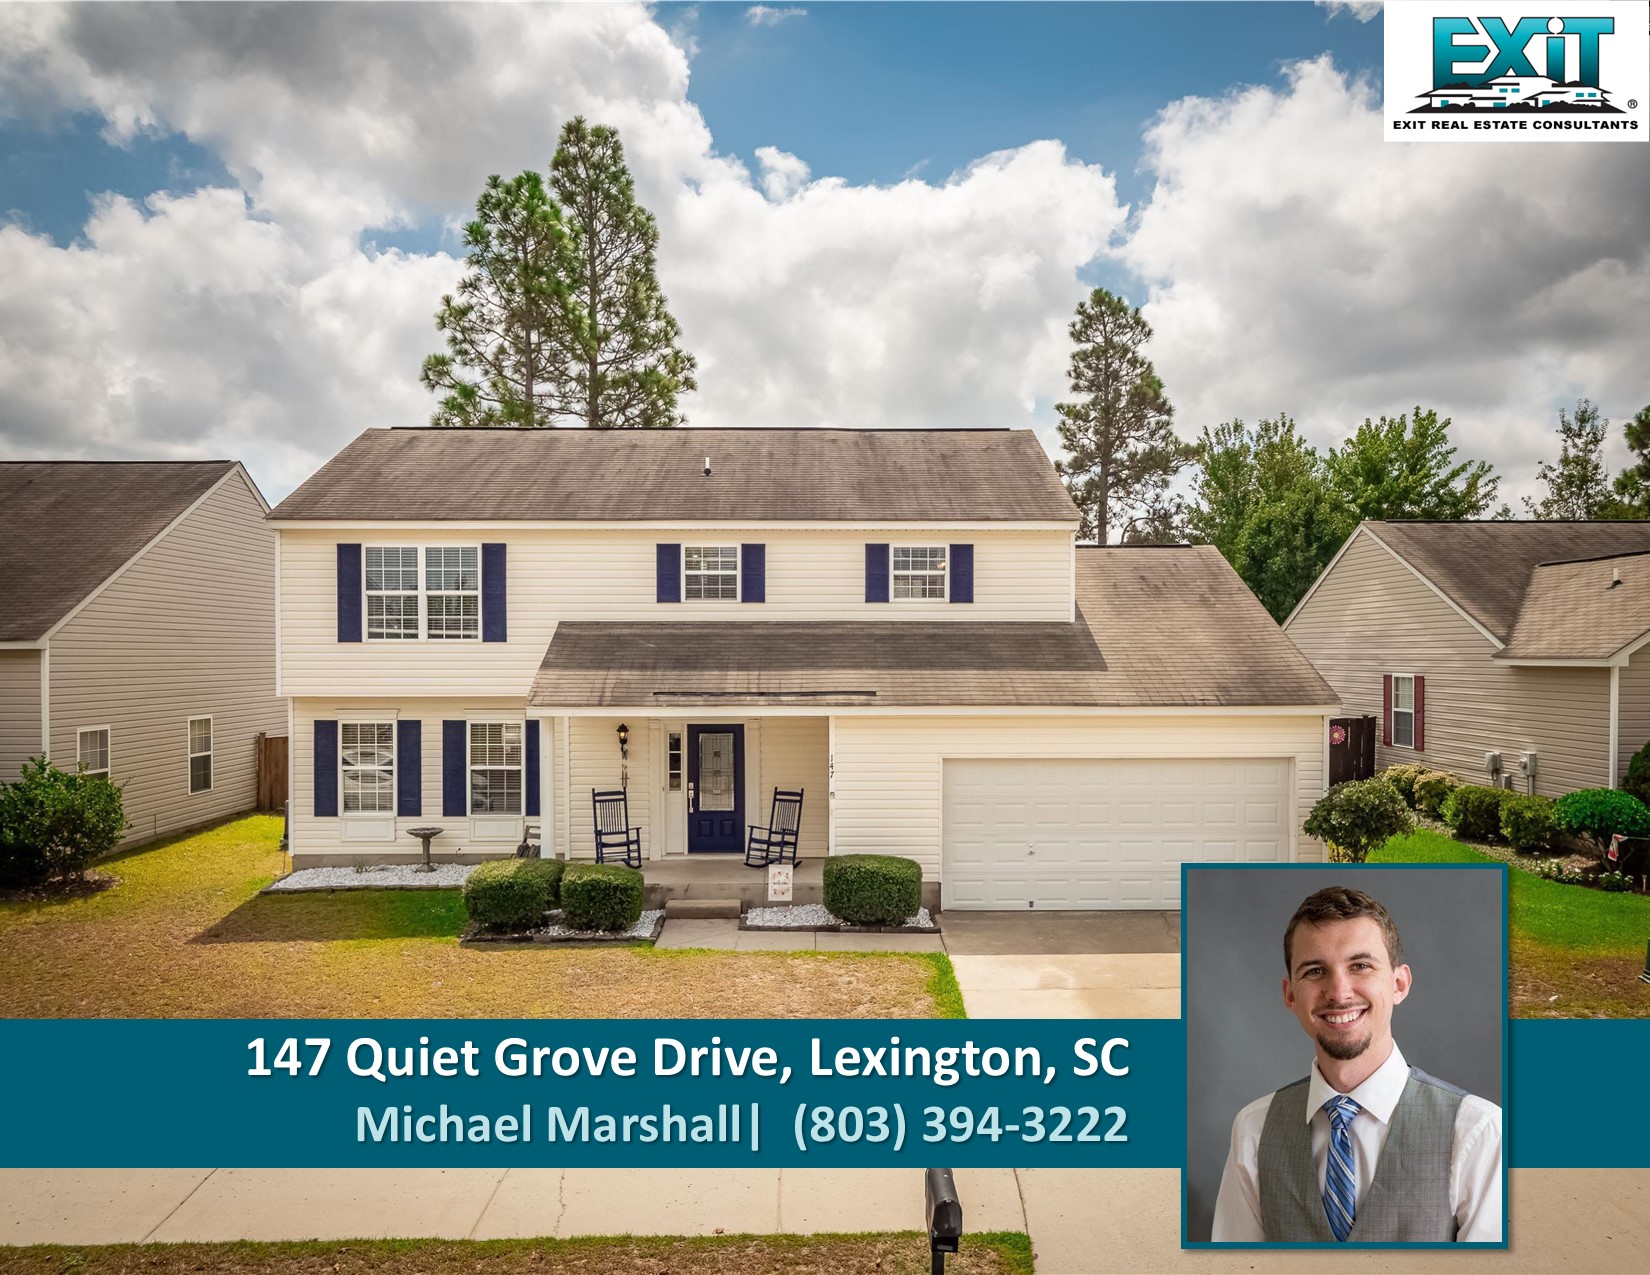 Just listed in Persimmon Grove - Lexington